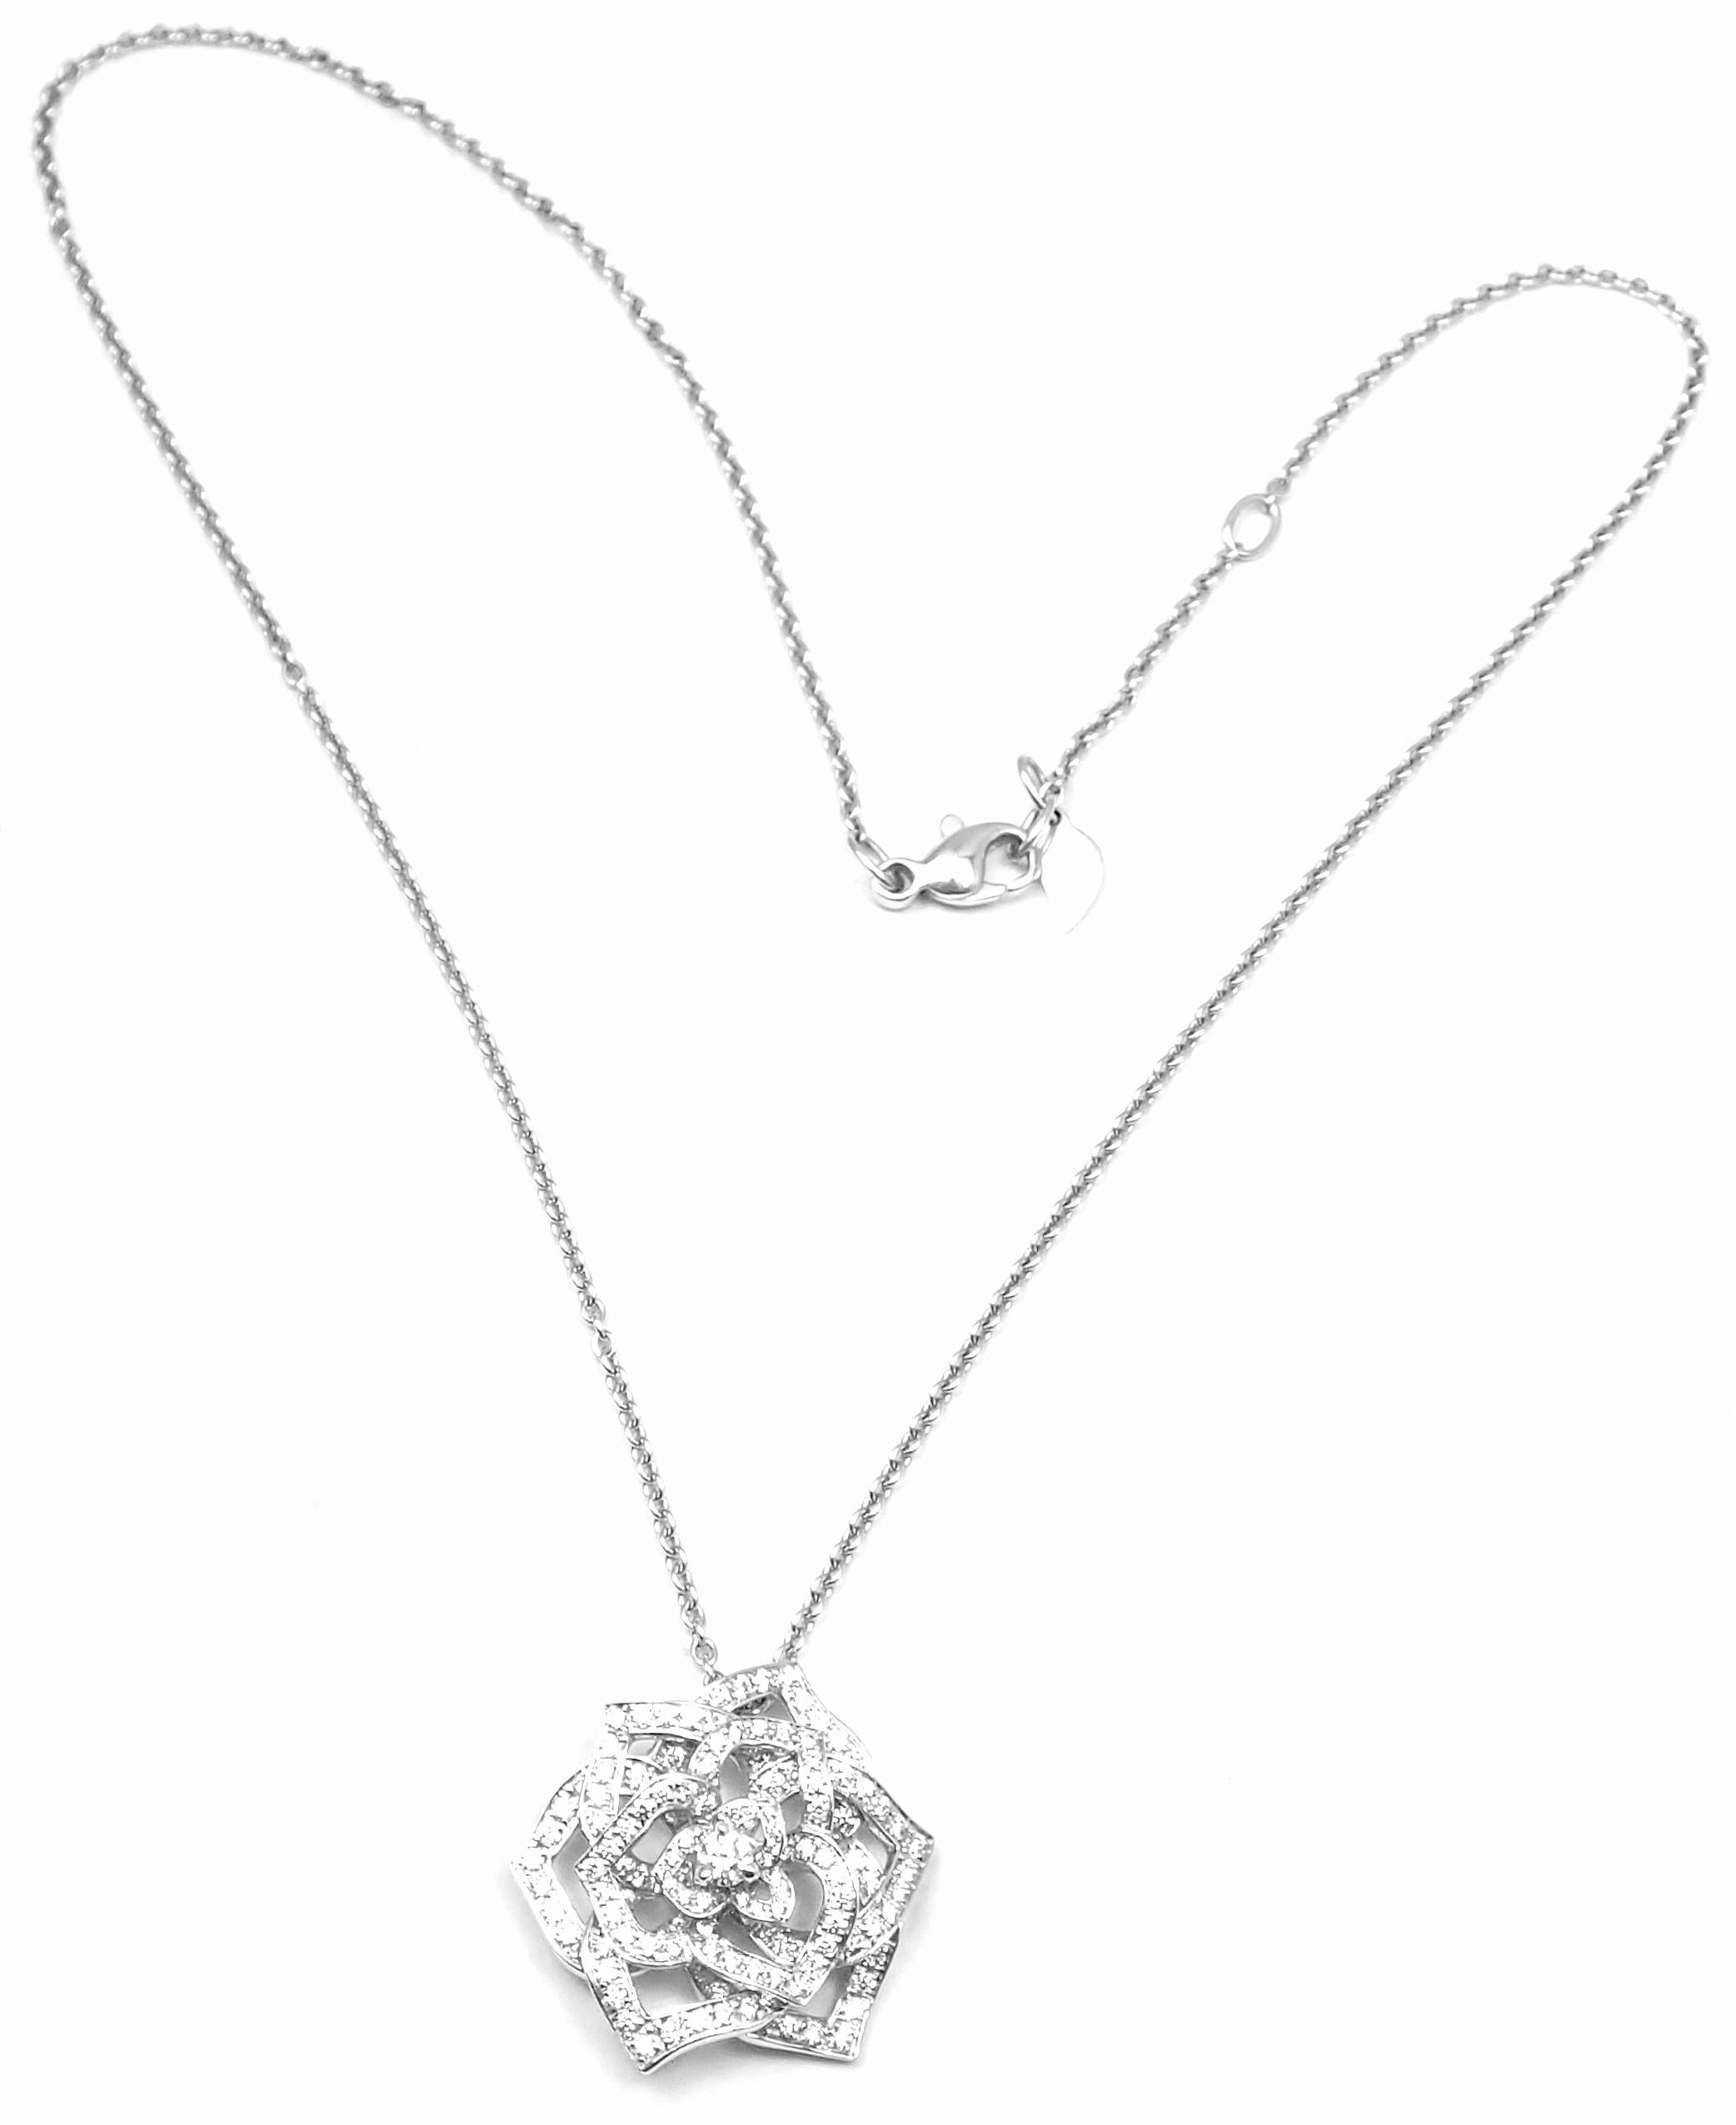 18k White Gold Diamond Rose Flower Pendant Necklace by Piaget. 
With Round brilliant cut diamonds VS1 clarity, G color total weight approximately 1.70ct
Details: 
Weight: 10.5 grams
Pendant: 25mm
Length: 16.5